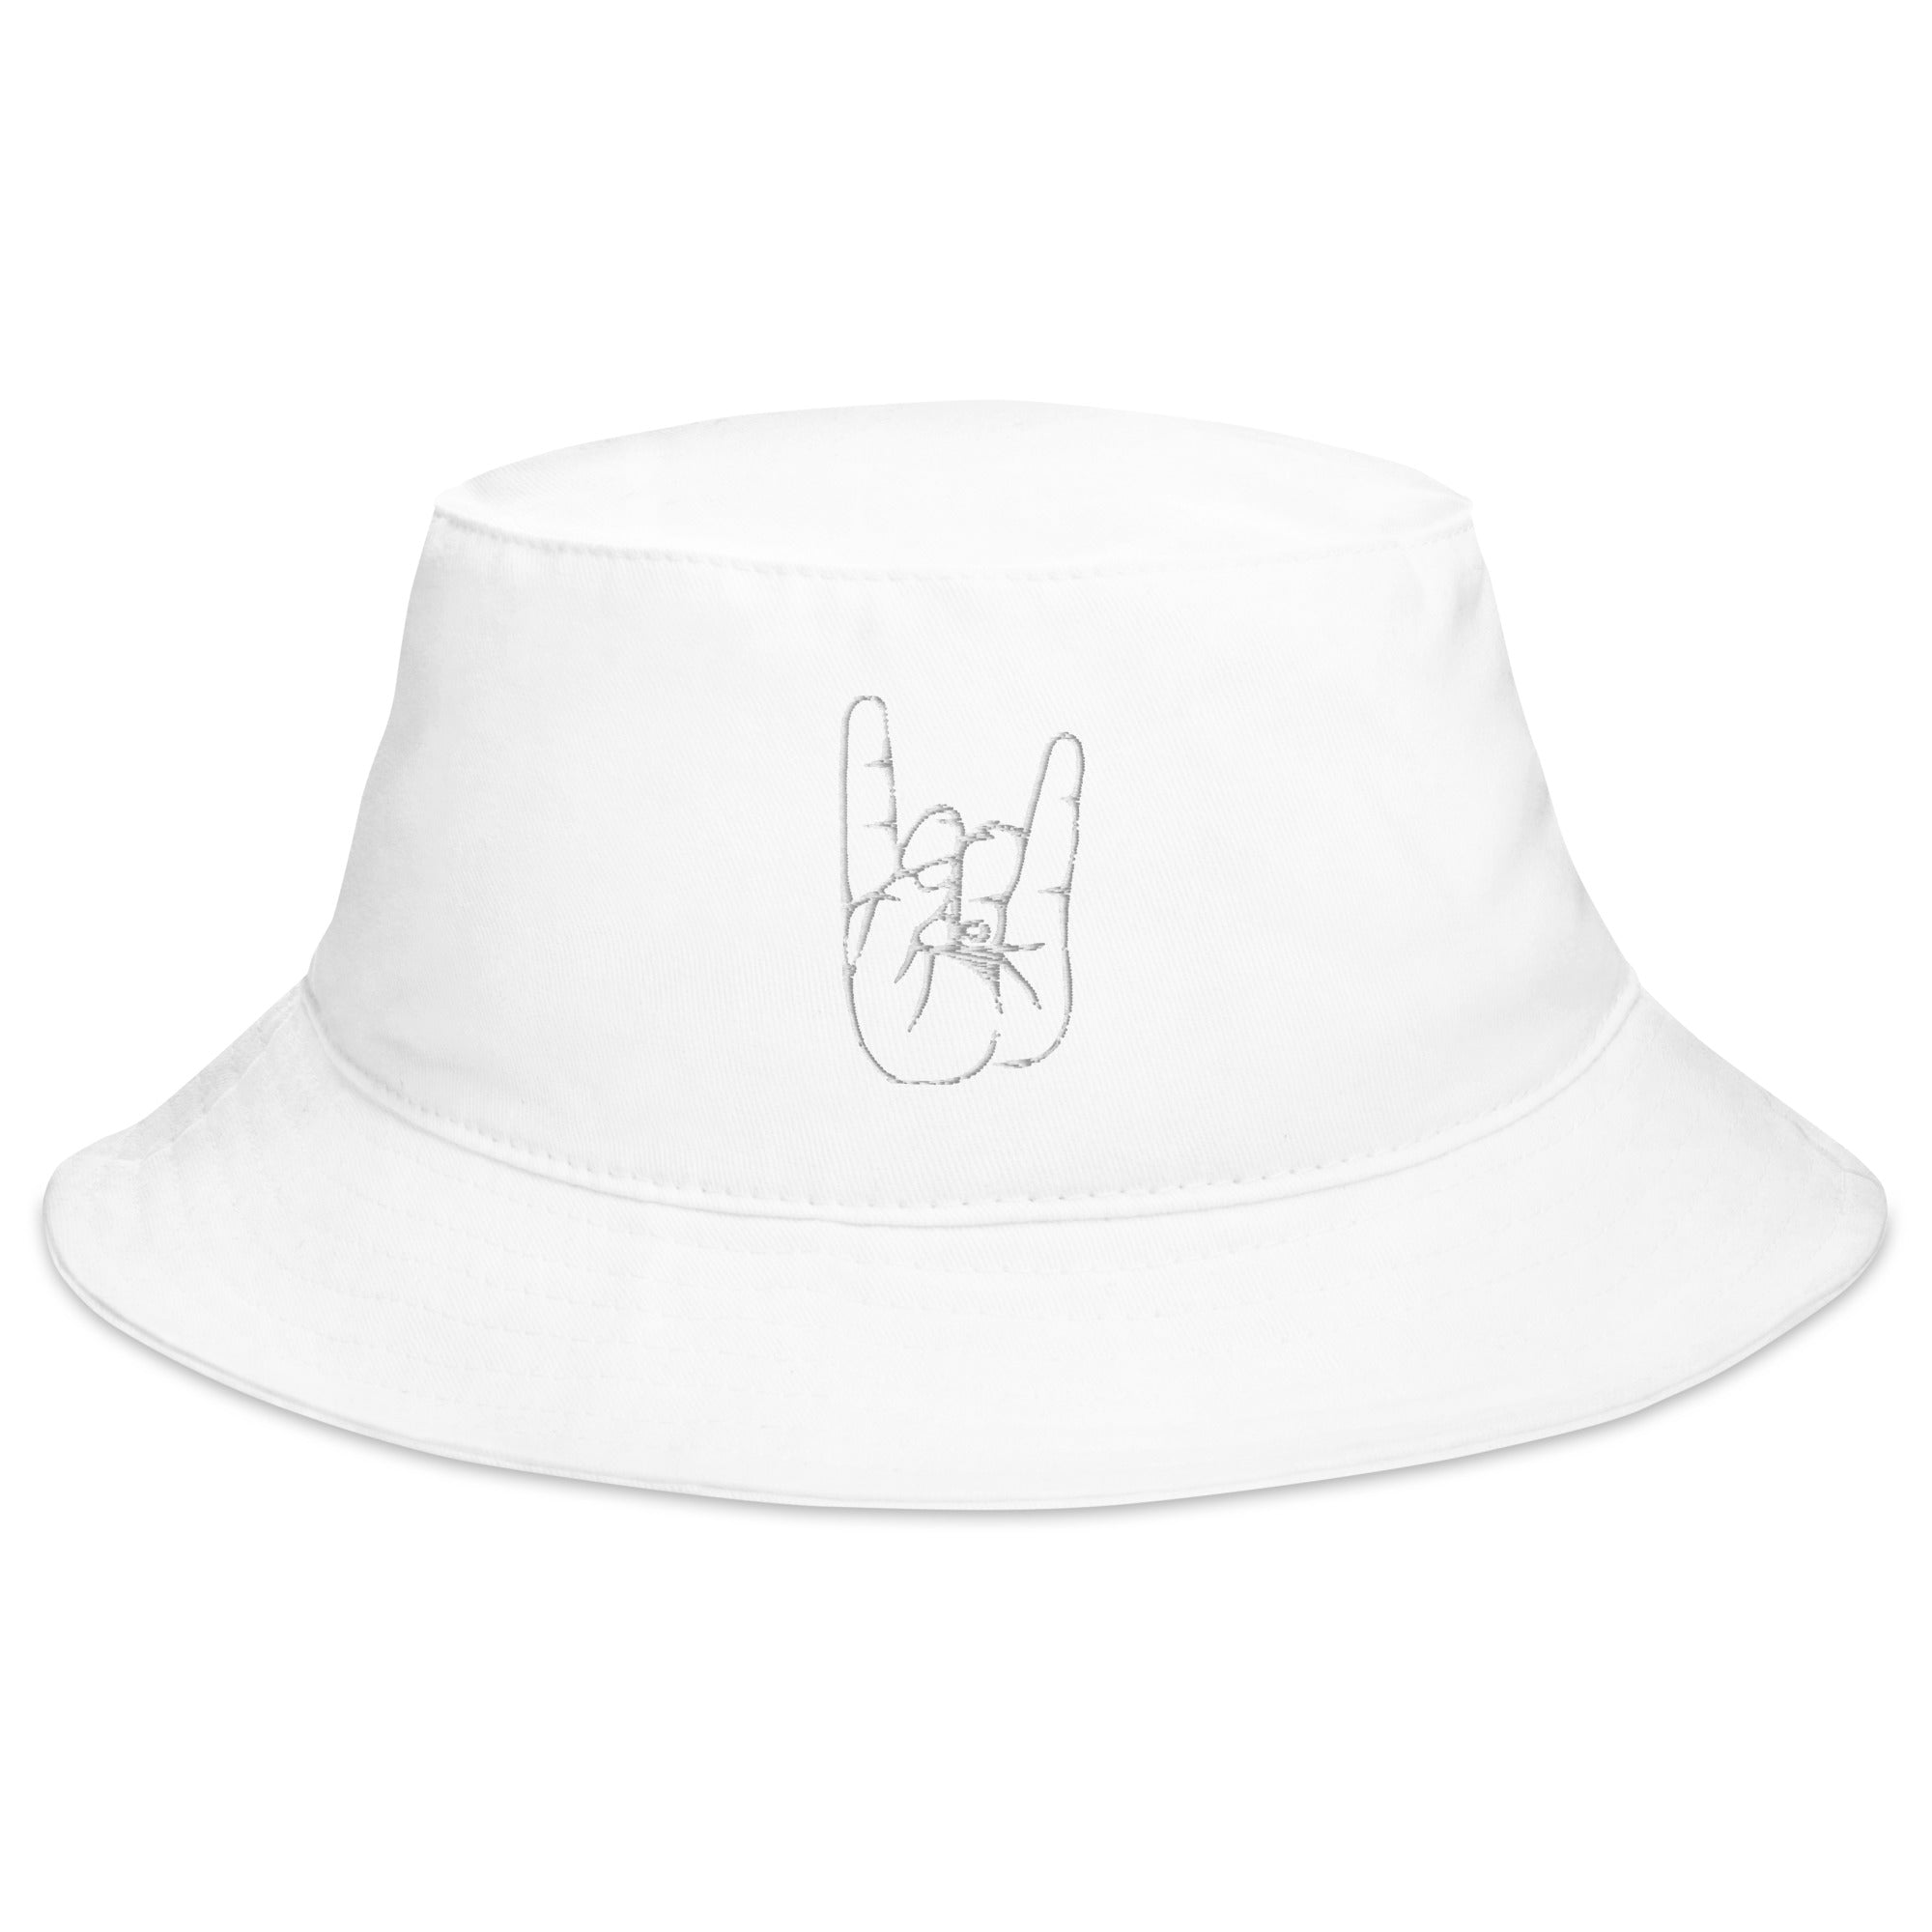 The Sign of the Horns Embroidered Bucket Hat Heavy Metal Devil Horns